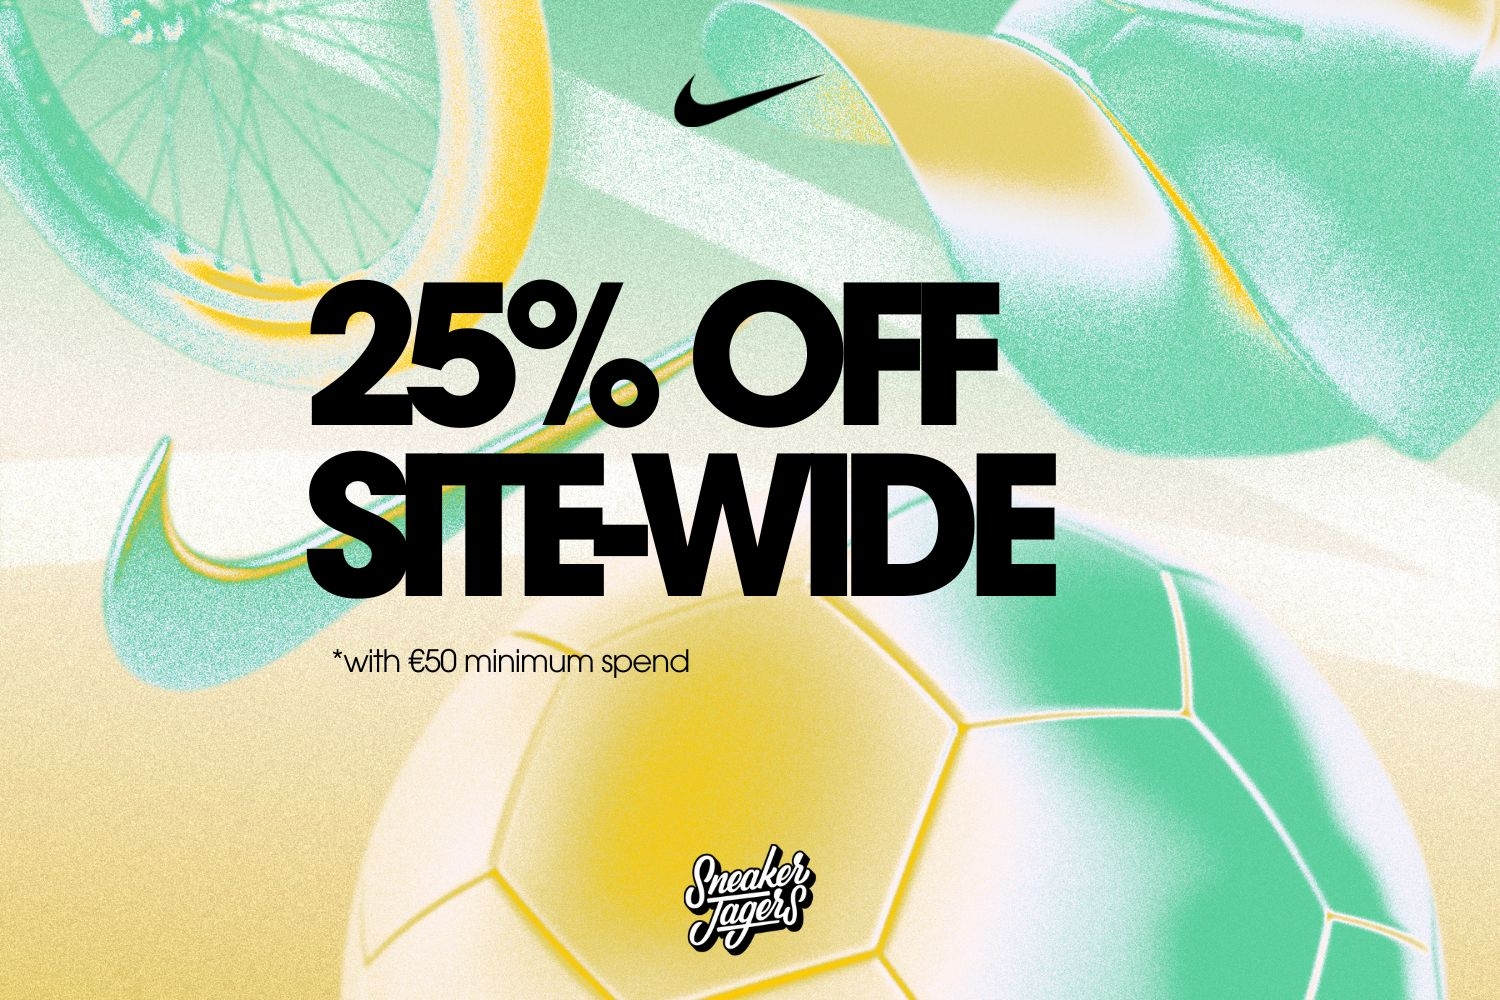 Nike Members can now enjoy 25% off